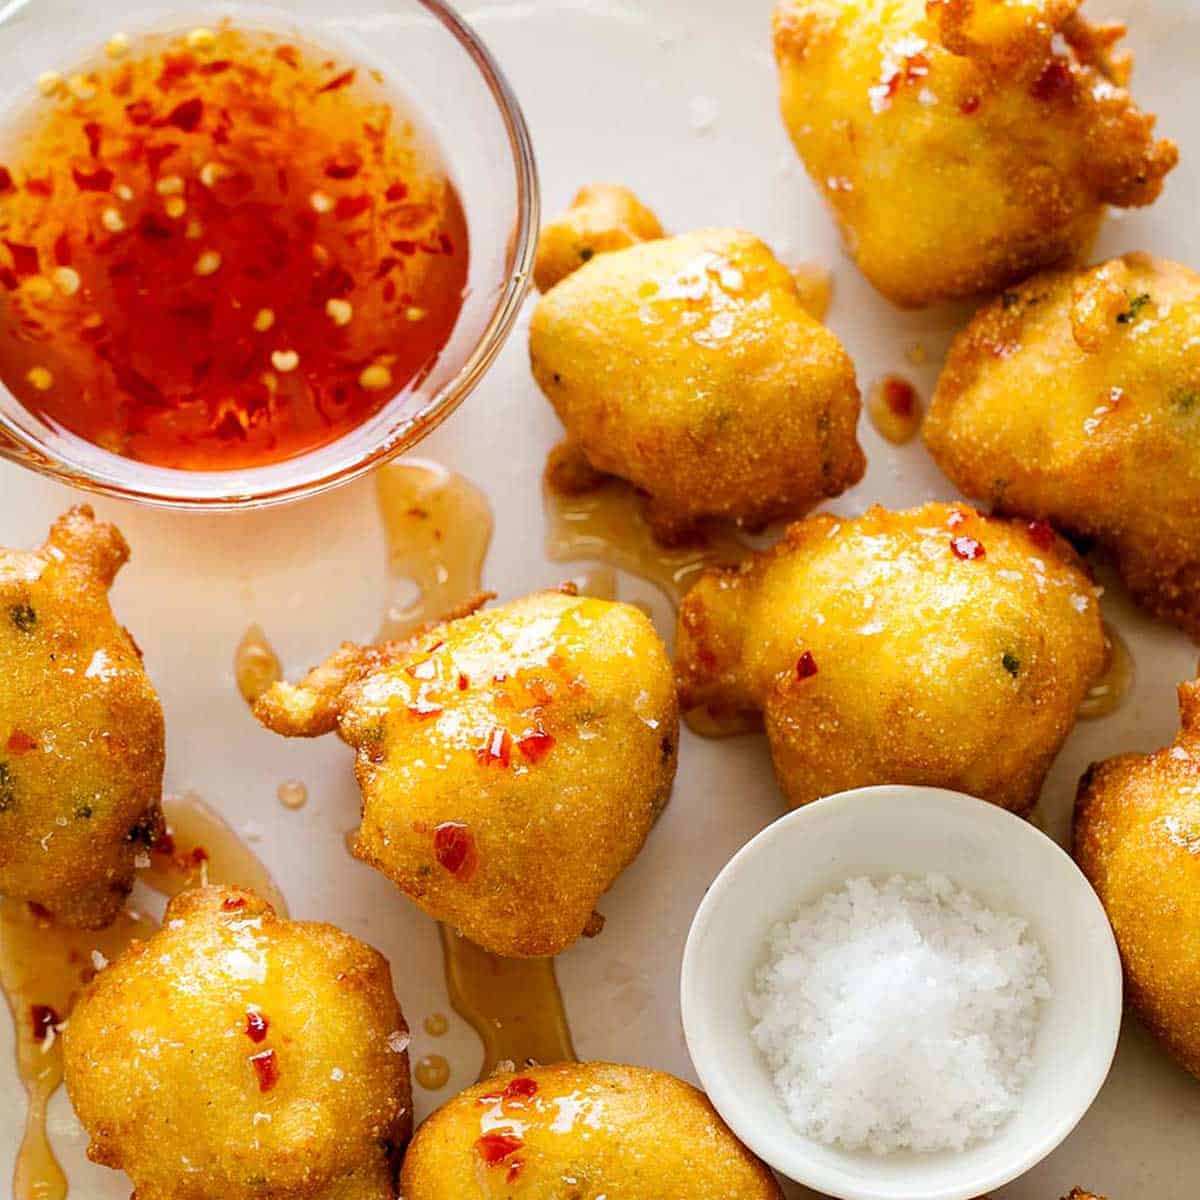 Hush puppies recipe with a sweet and spicy sauce.